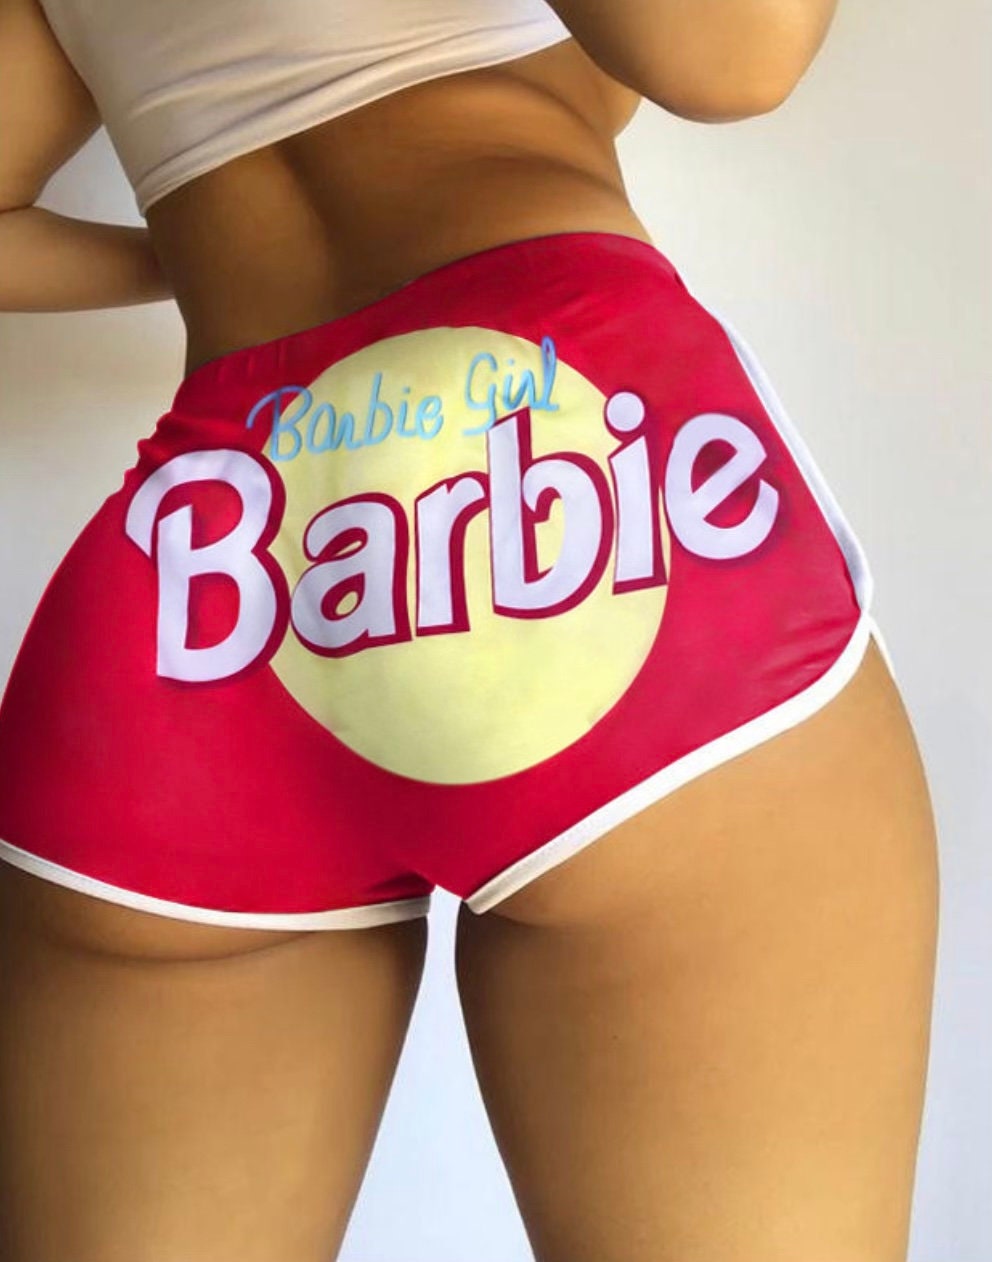 Booty shorts for women sexy